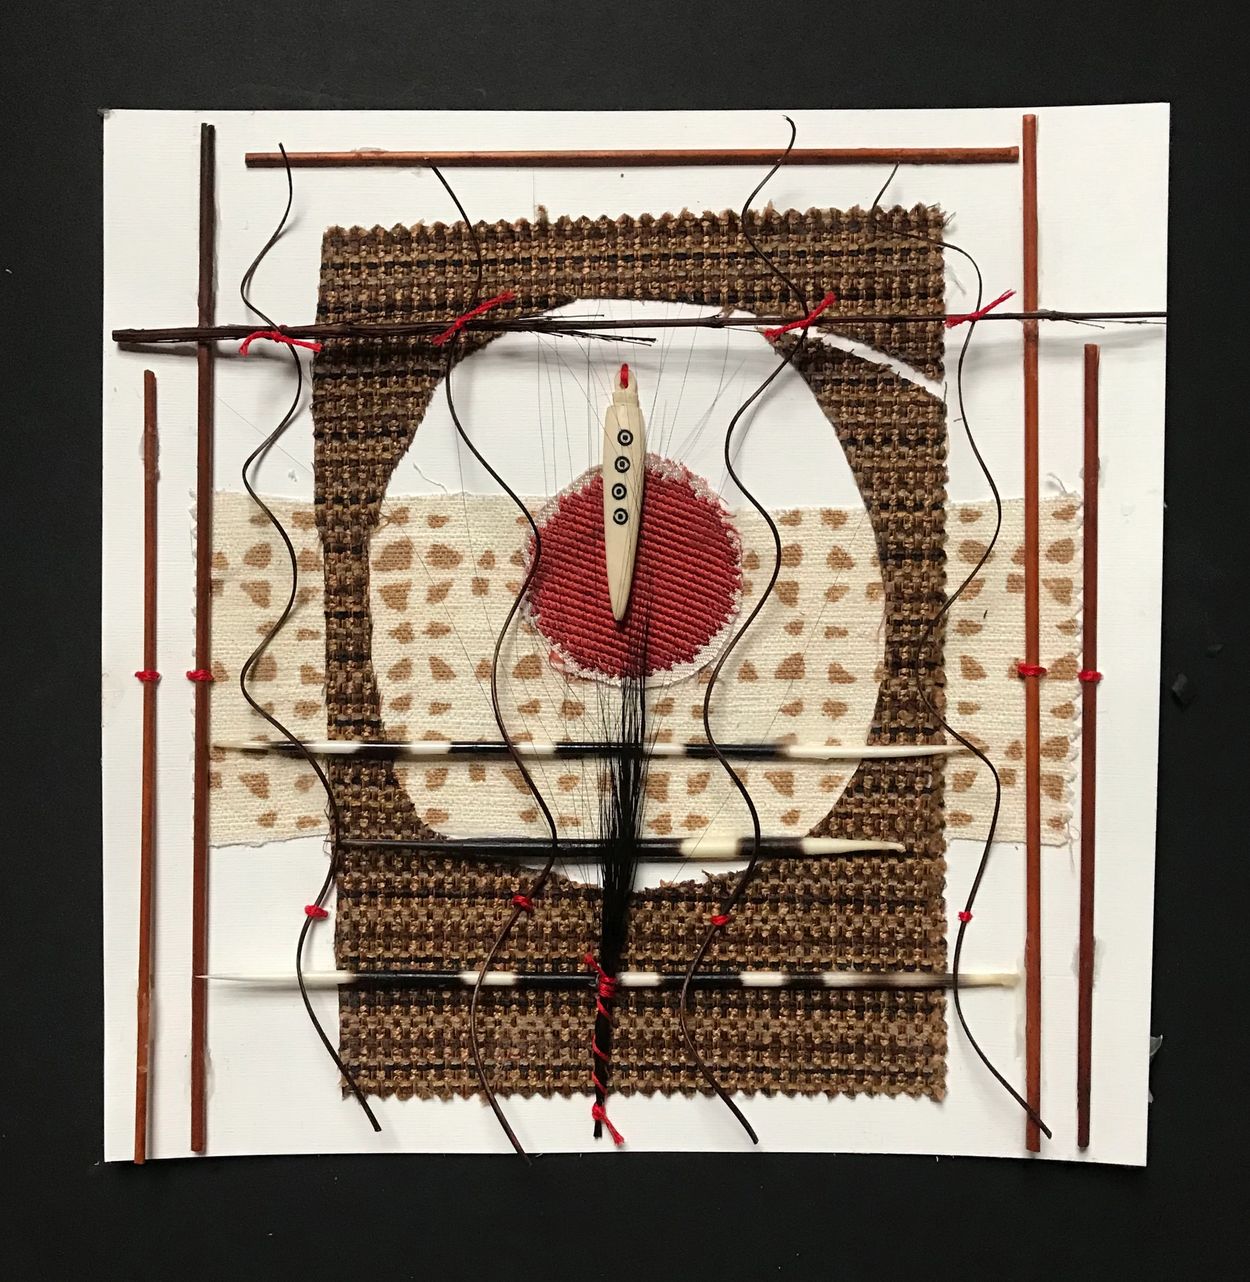  "The Power Within" Collage,12'x12"  fabric, Ethiopian shaman spear,porcupine quills, wood,thread